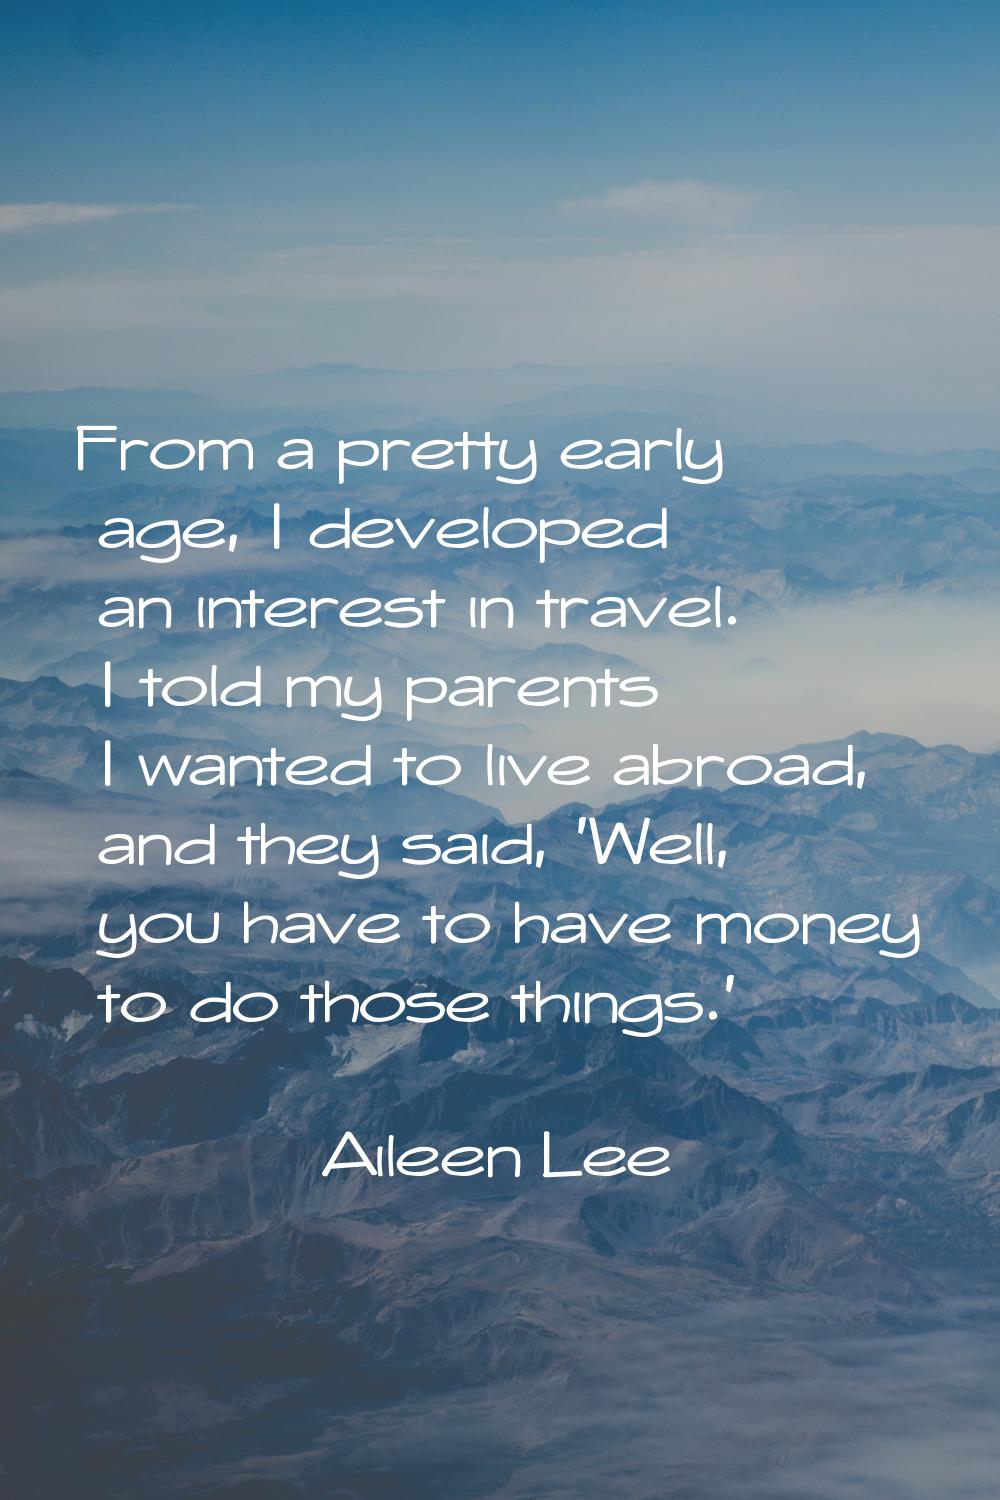 From a pretty early age, I developed an interest in travel. I told my parents I wanted to live abro